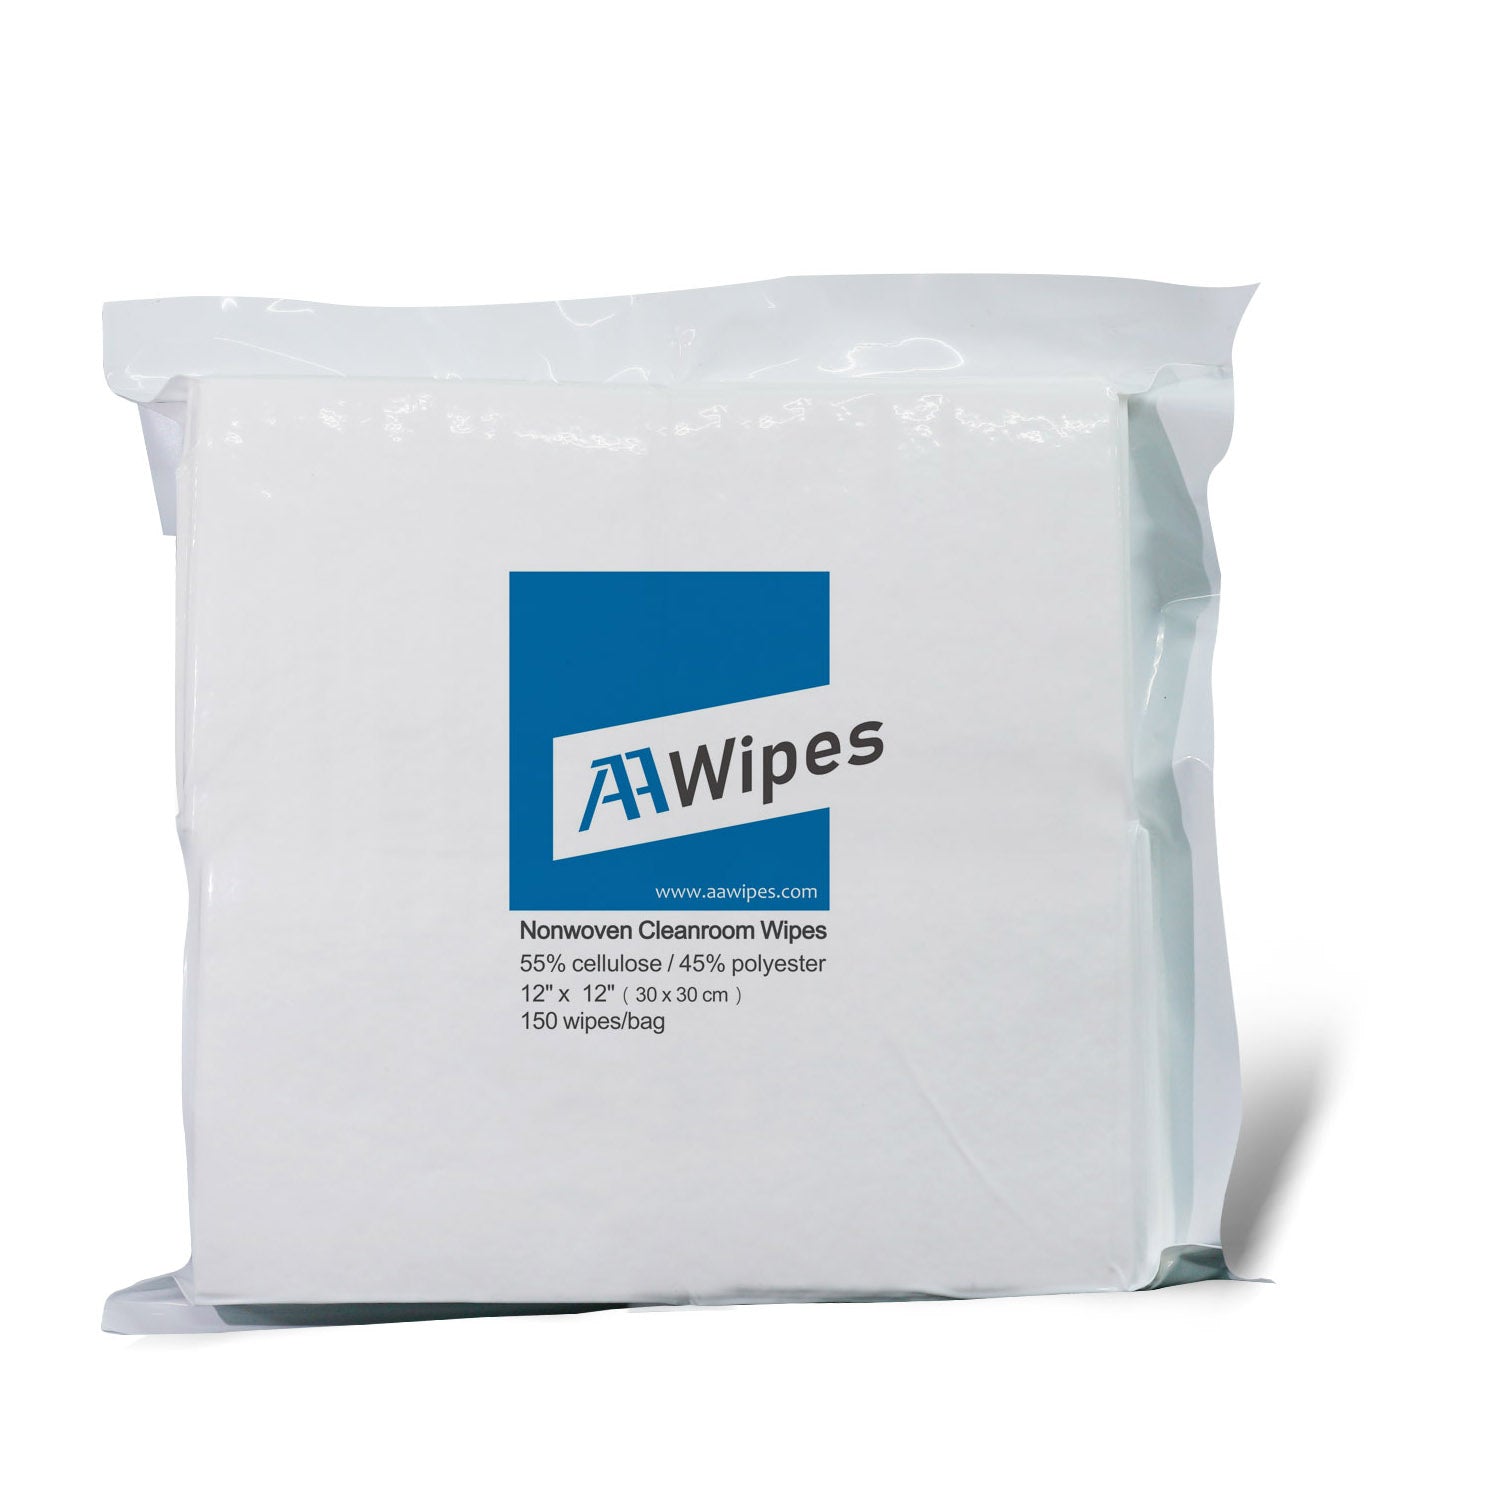 AAwipes Nonwoven Wipes: 12"x12" Cellulose/Polyester. 3,000 wipes/box in 20 bags (No. NW06812).